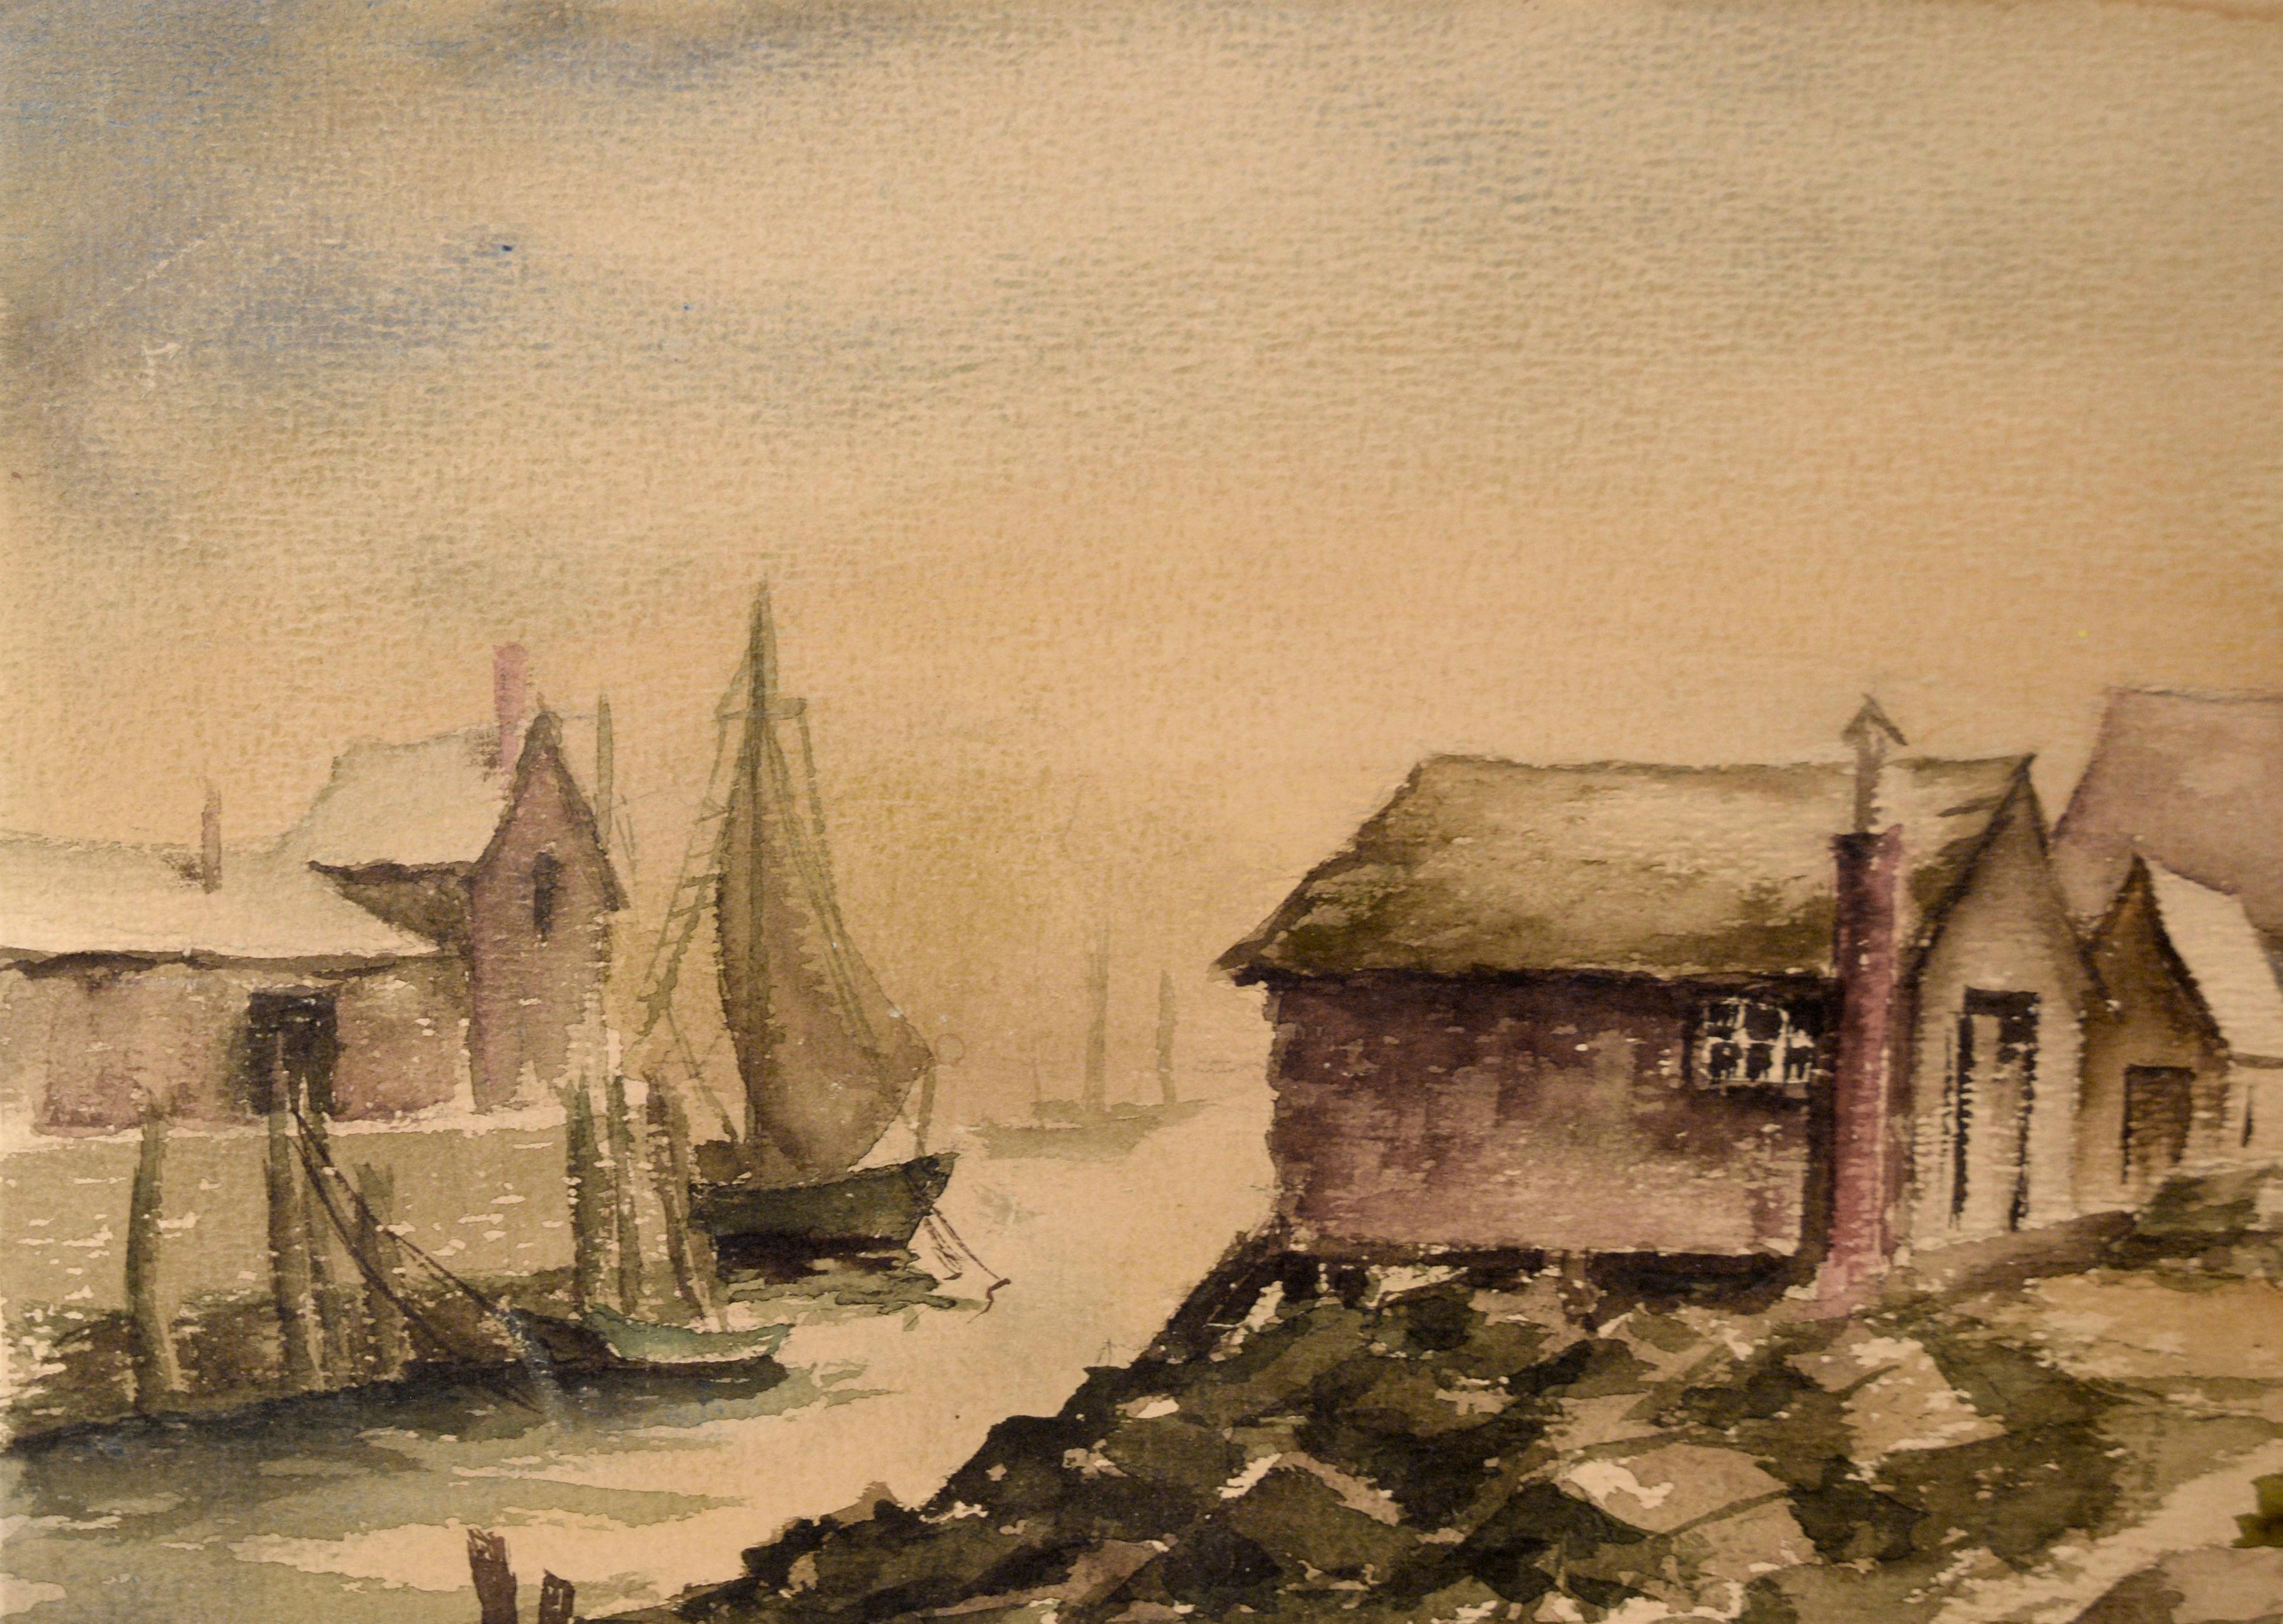 Fishing Village in Gloucester Harbor, 1950 - Watercolor on Paper - Impressionist Art by Unknown